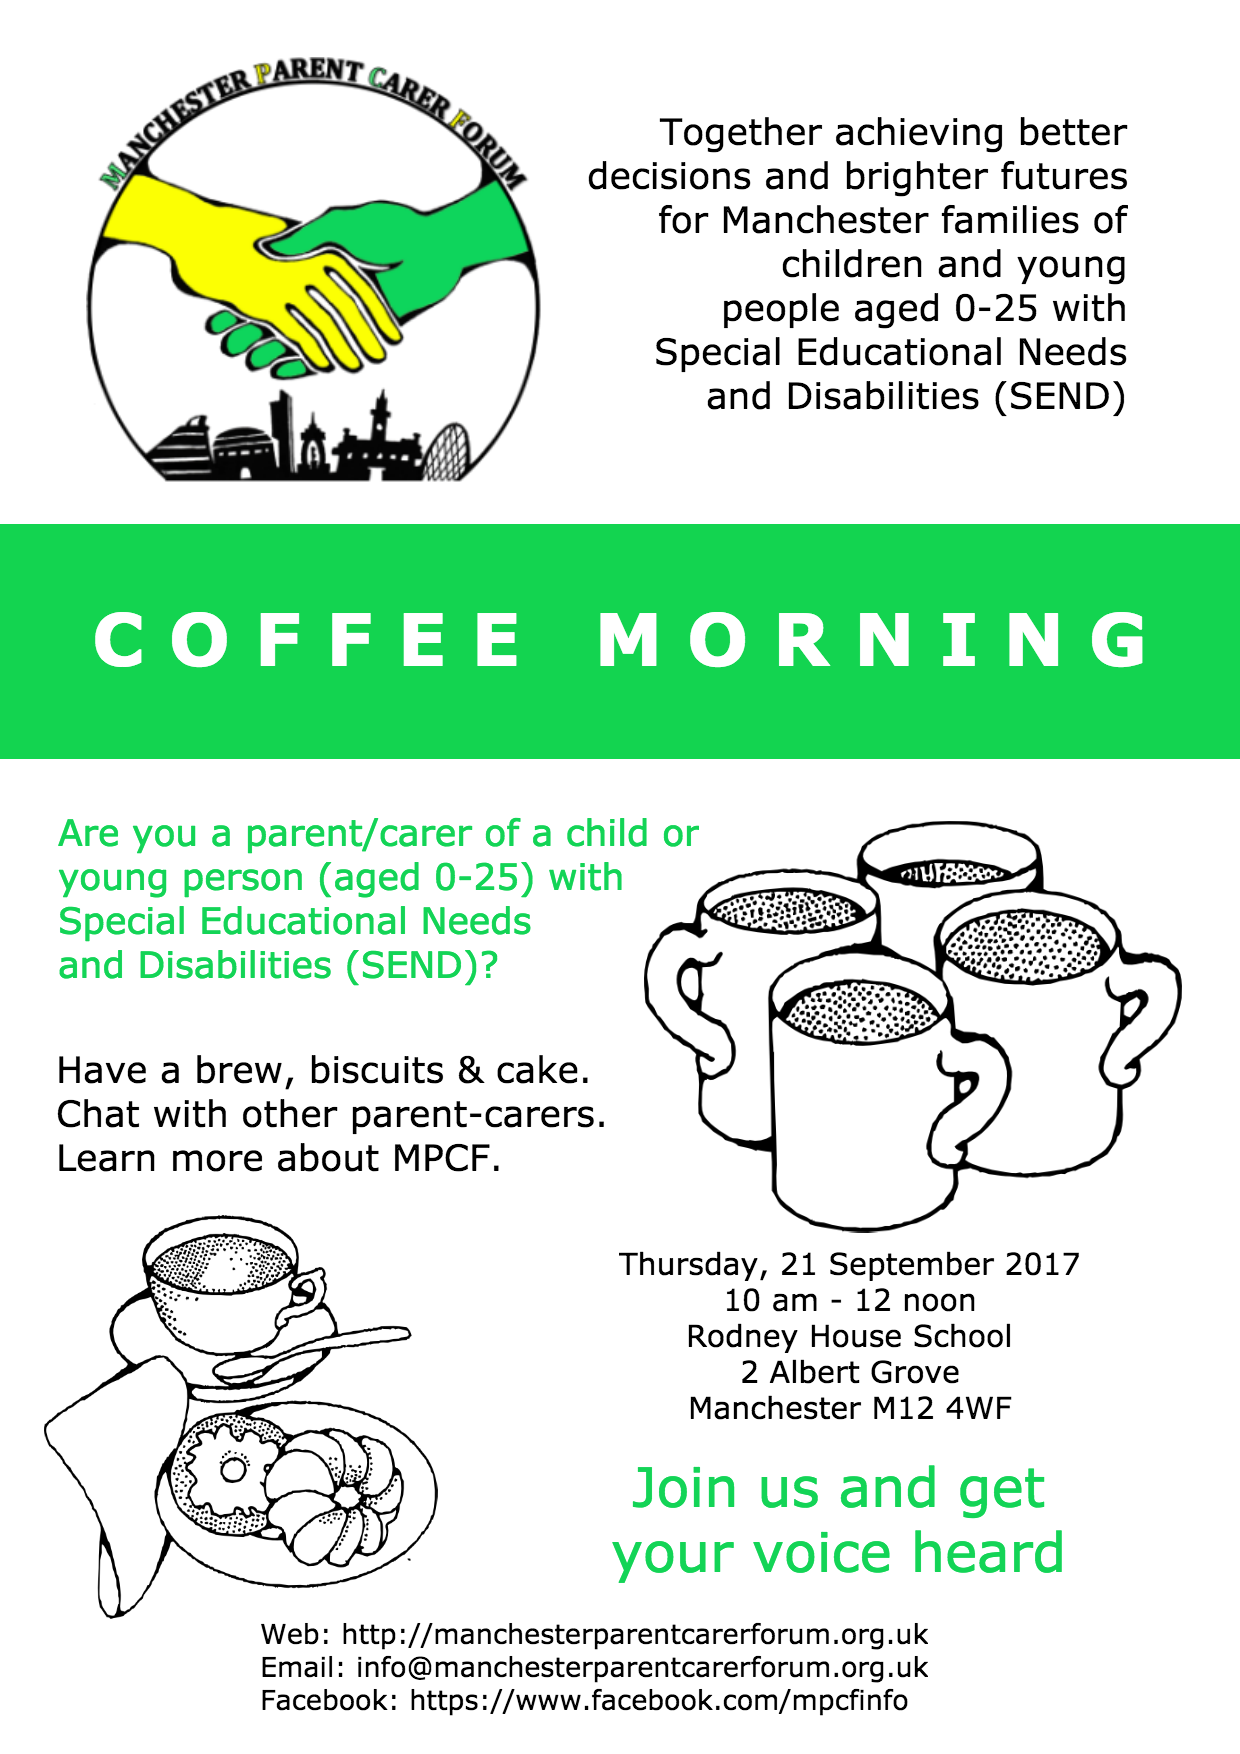 flyer for the MPCF Coffee Morning at Rodney House School on 21 September 2017